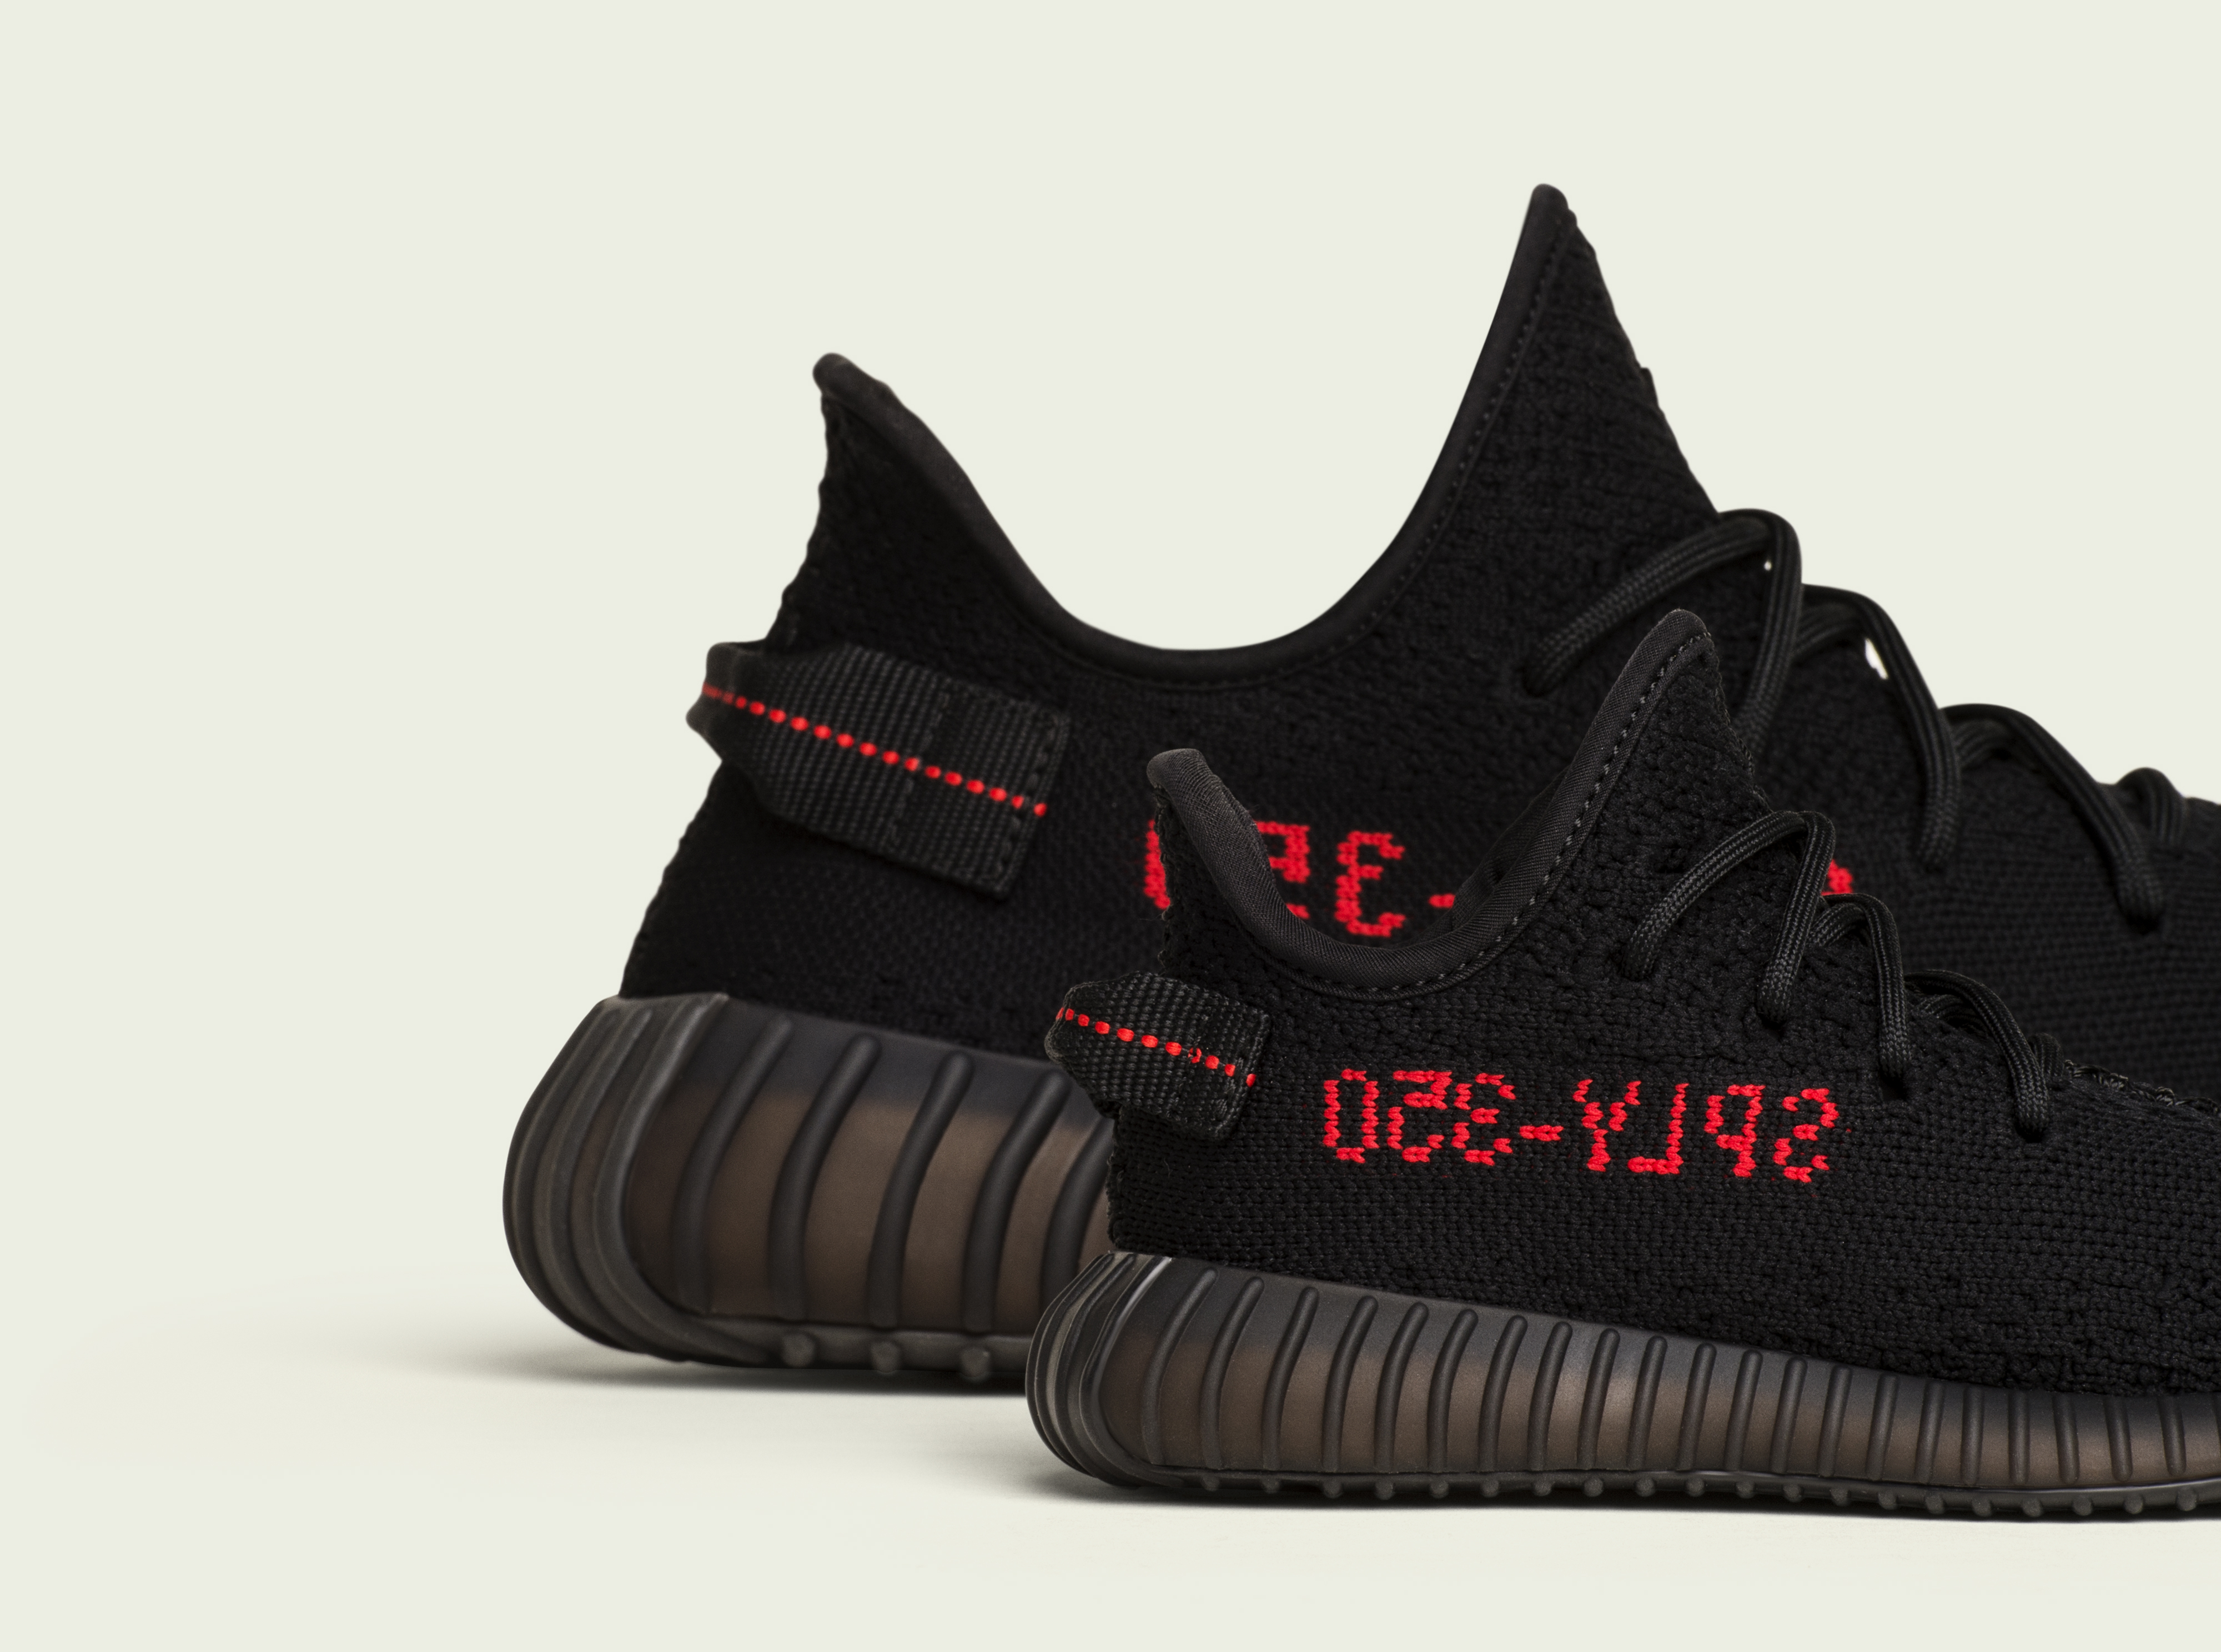 Adidas Yeezy Boost 350 V2 'Core Black/Red': What They Cost And Where To